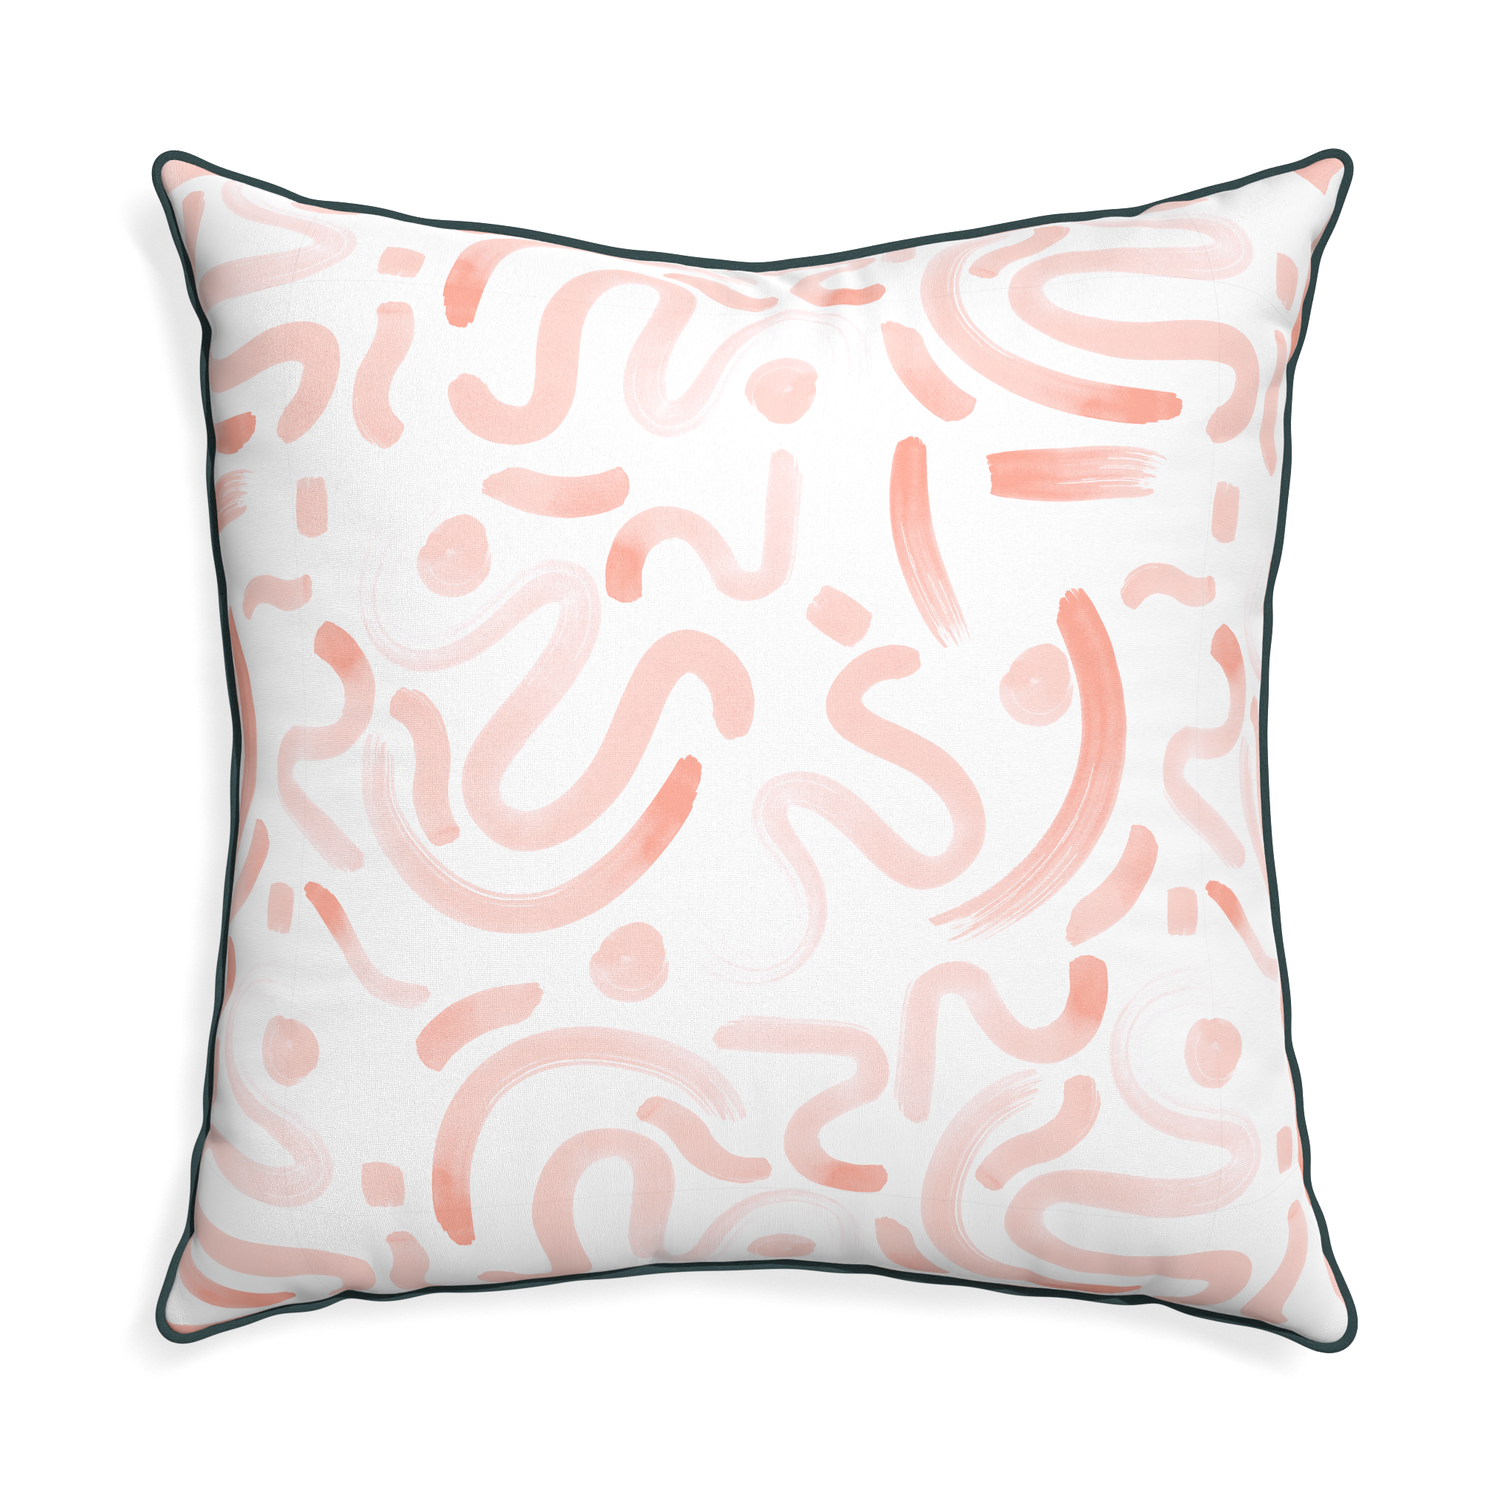 Euro-sham hockney pink custom pink graphicpillow with p piping on white background